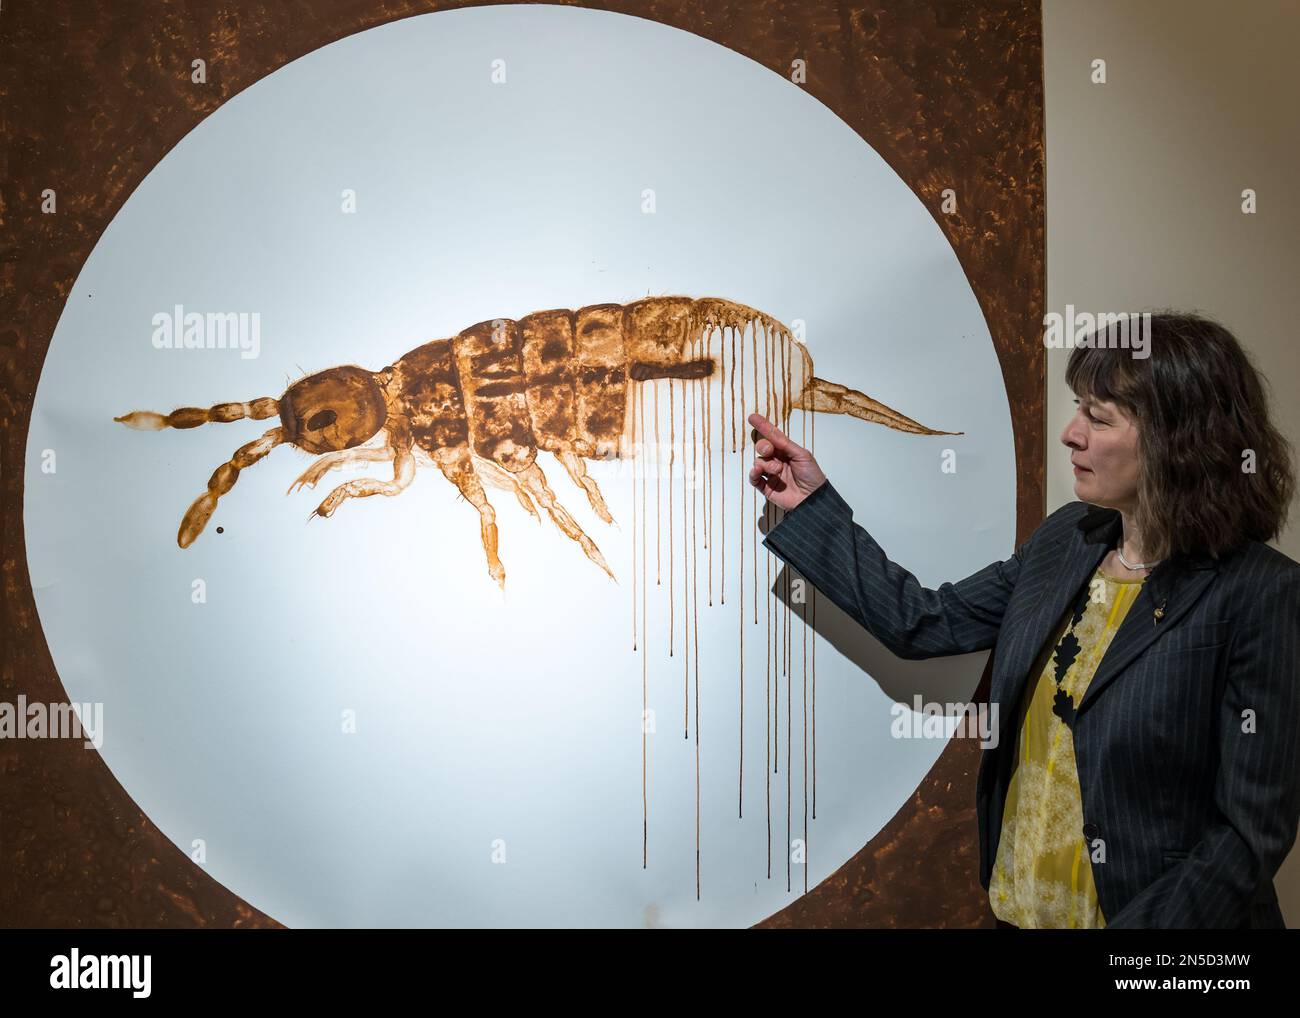 Edinburgh, Scotland, UK, 9th February 2023. Living Soil mixed media art exhibition preview: Artist Natalie Taylor with her work from a 4 month residency at the Royal Botanic Garden at the John Hope Gateway visitor centre. She has made the vitality of soil visible through paintings, photographs and poetic plates. Pictured: a drawing of a springtail, a creature important for turning organic material into soil. Credit: Sally Anderson/Alamy Live News Stock Photo